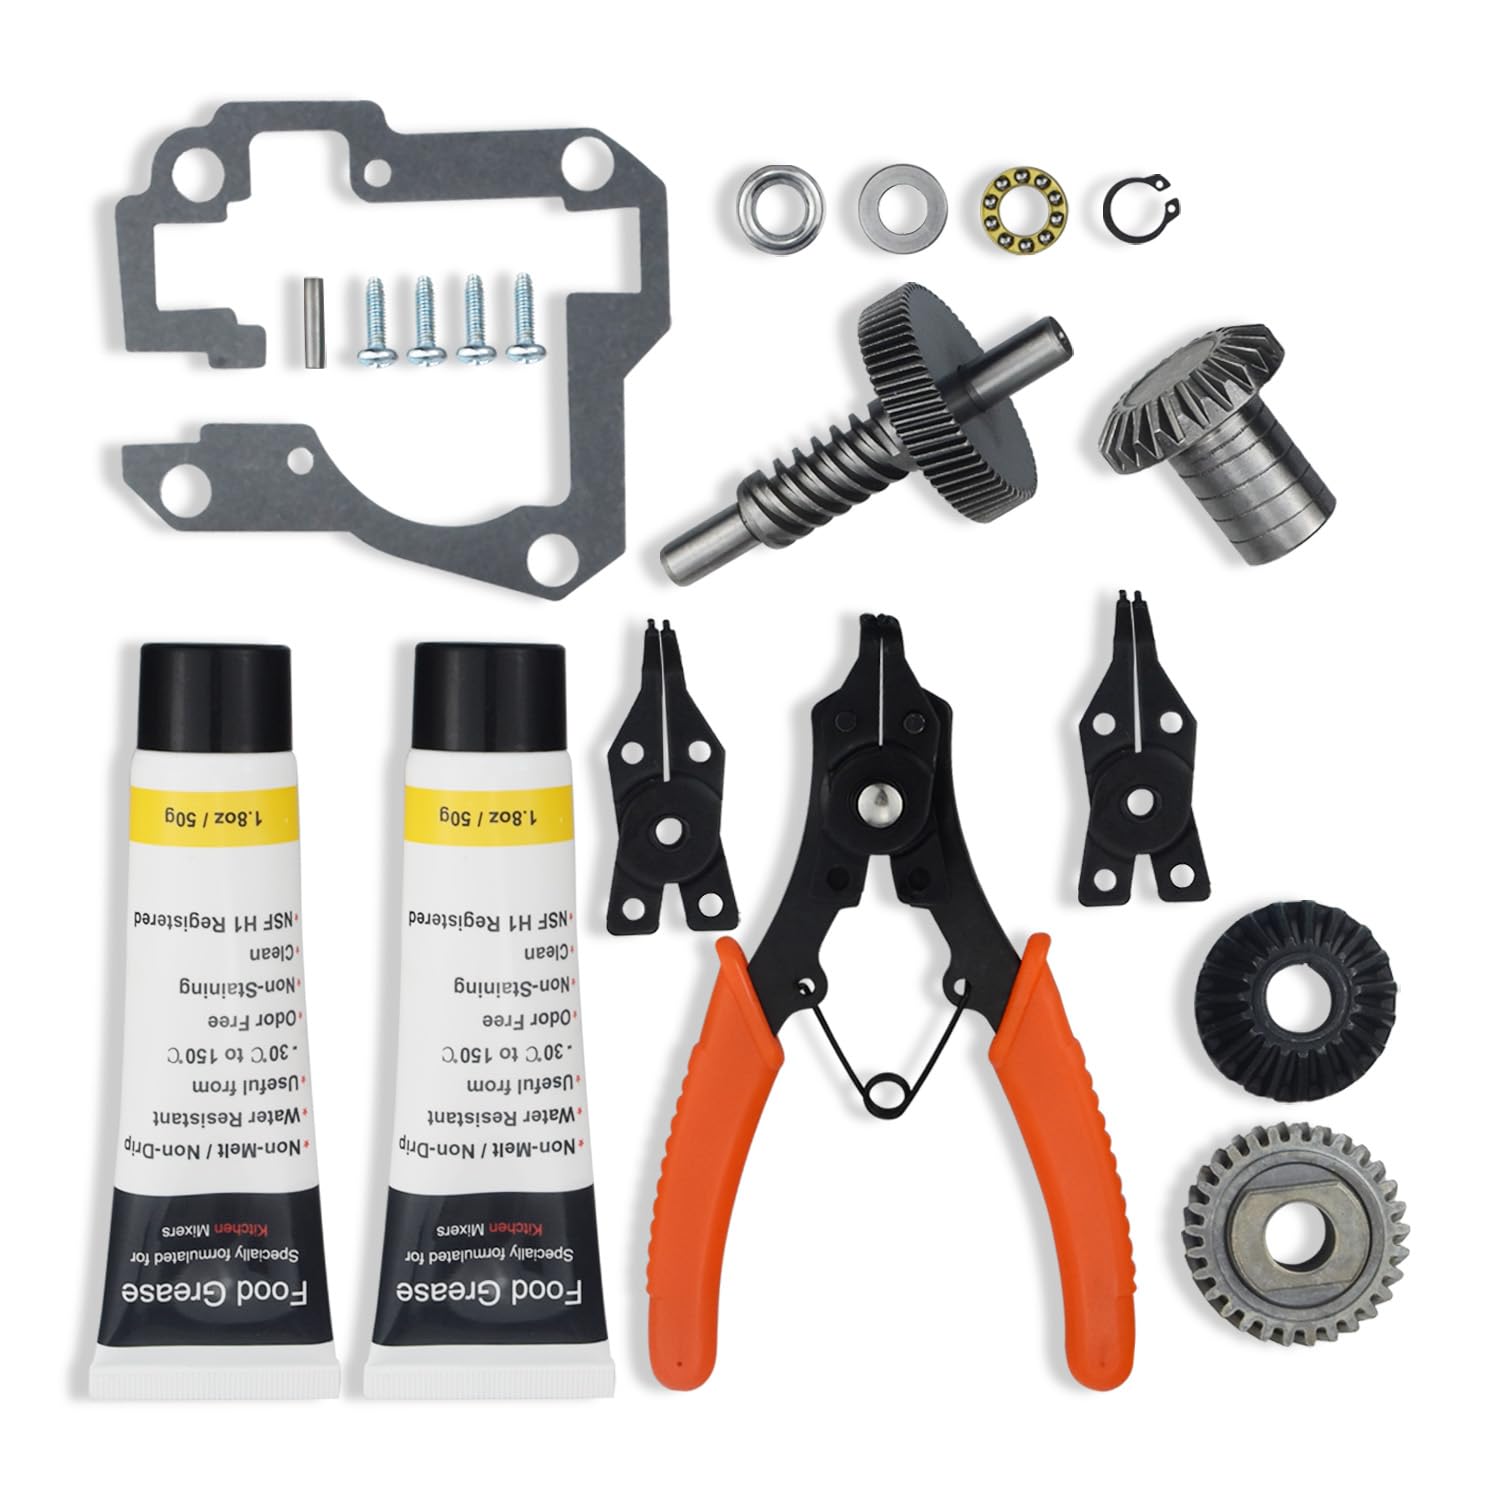 Worm Gear Kit 9706529, 9709511, 9703337, 9709231 Compatible With Whirlpool/ KitchenAid 5QT & 6QT Stand Mixer with Worm Gear, Food Grade Grease,  Retaining Ring Pliers, Mixer Bevel Gear Kit etc